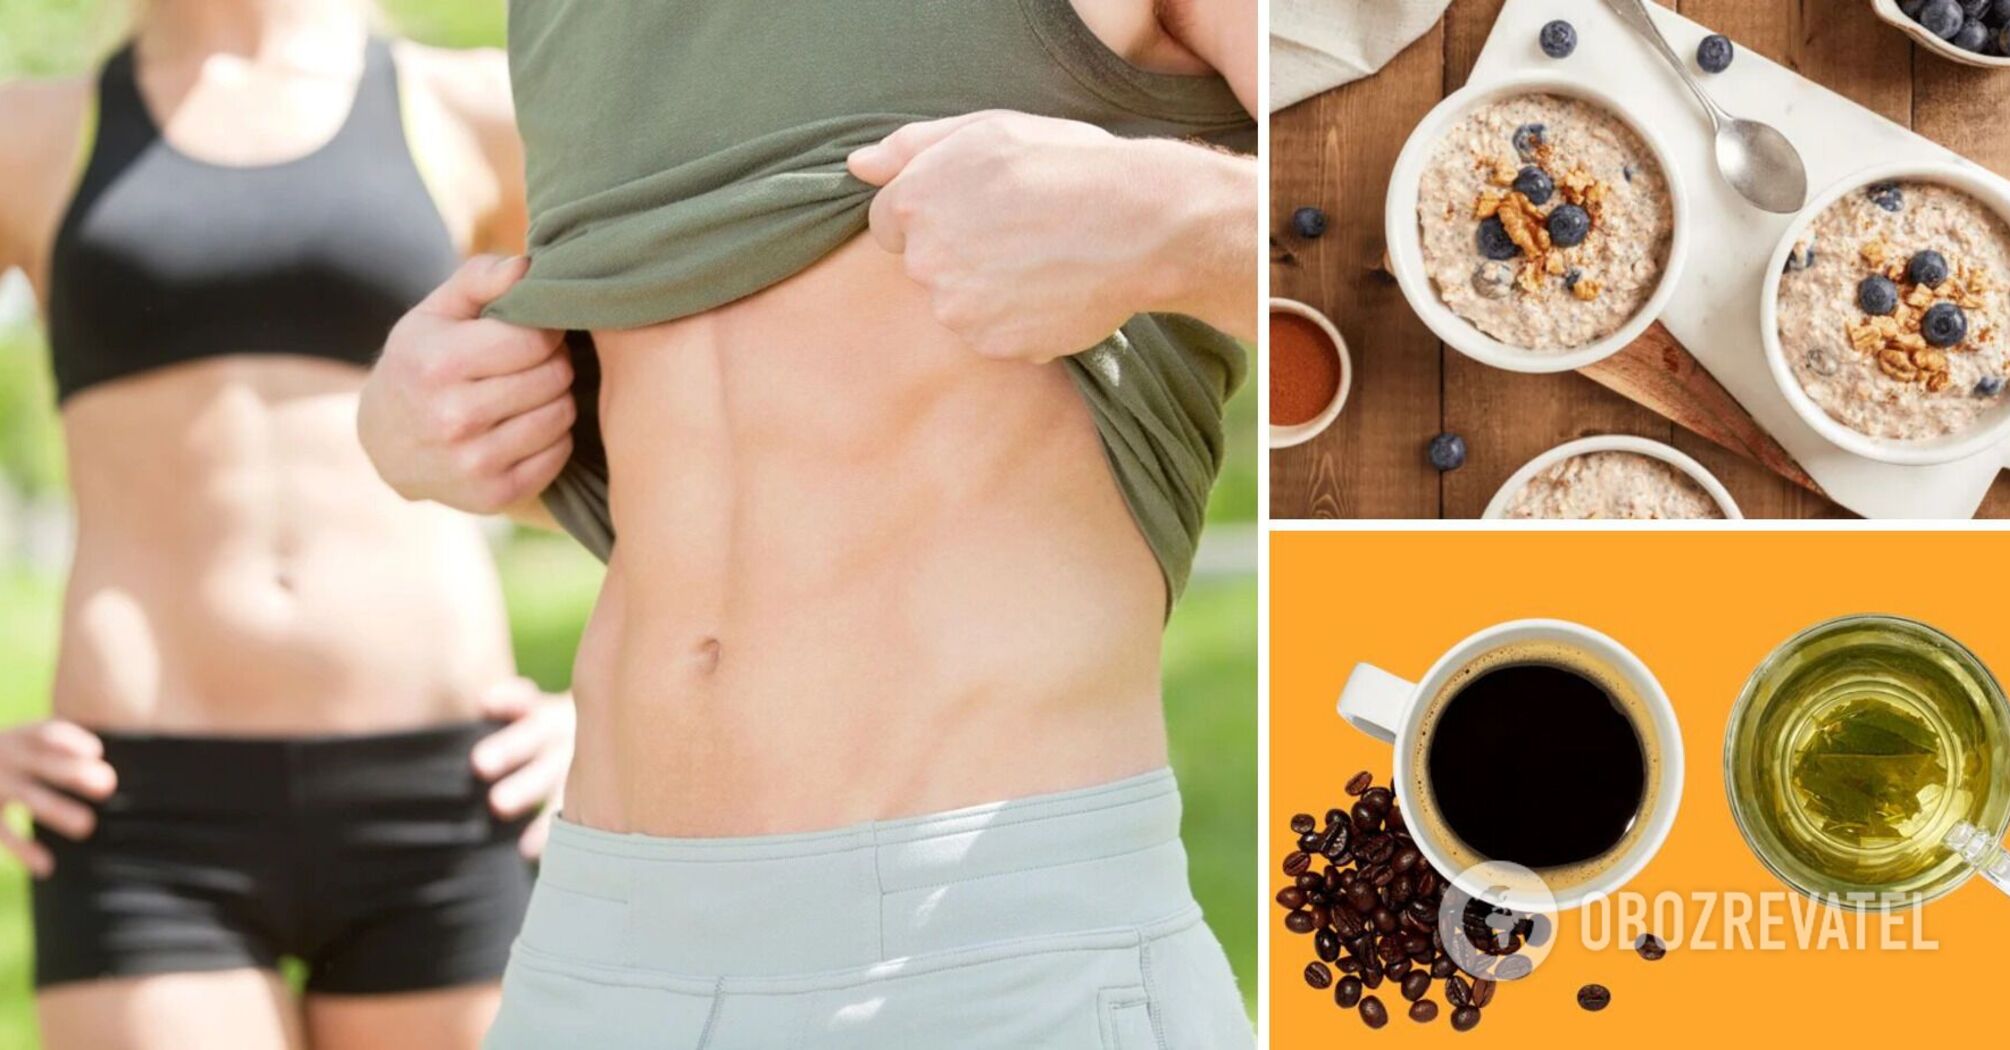 The top 9 best breakfast habits for a flat stomach: advice from nutritionists and experts